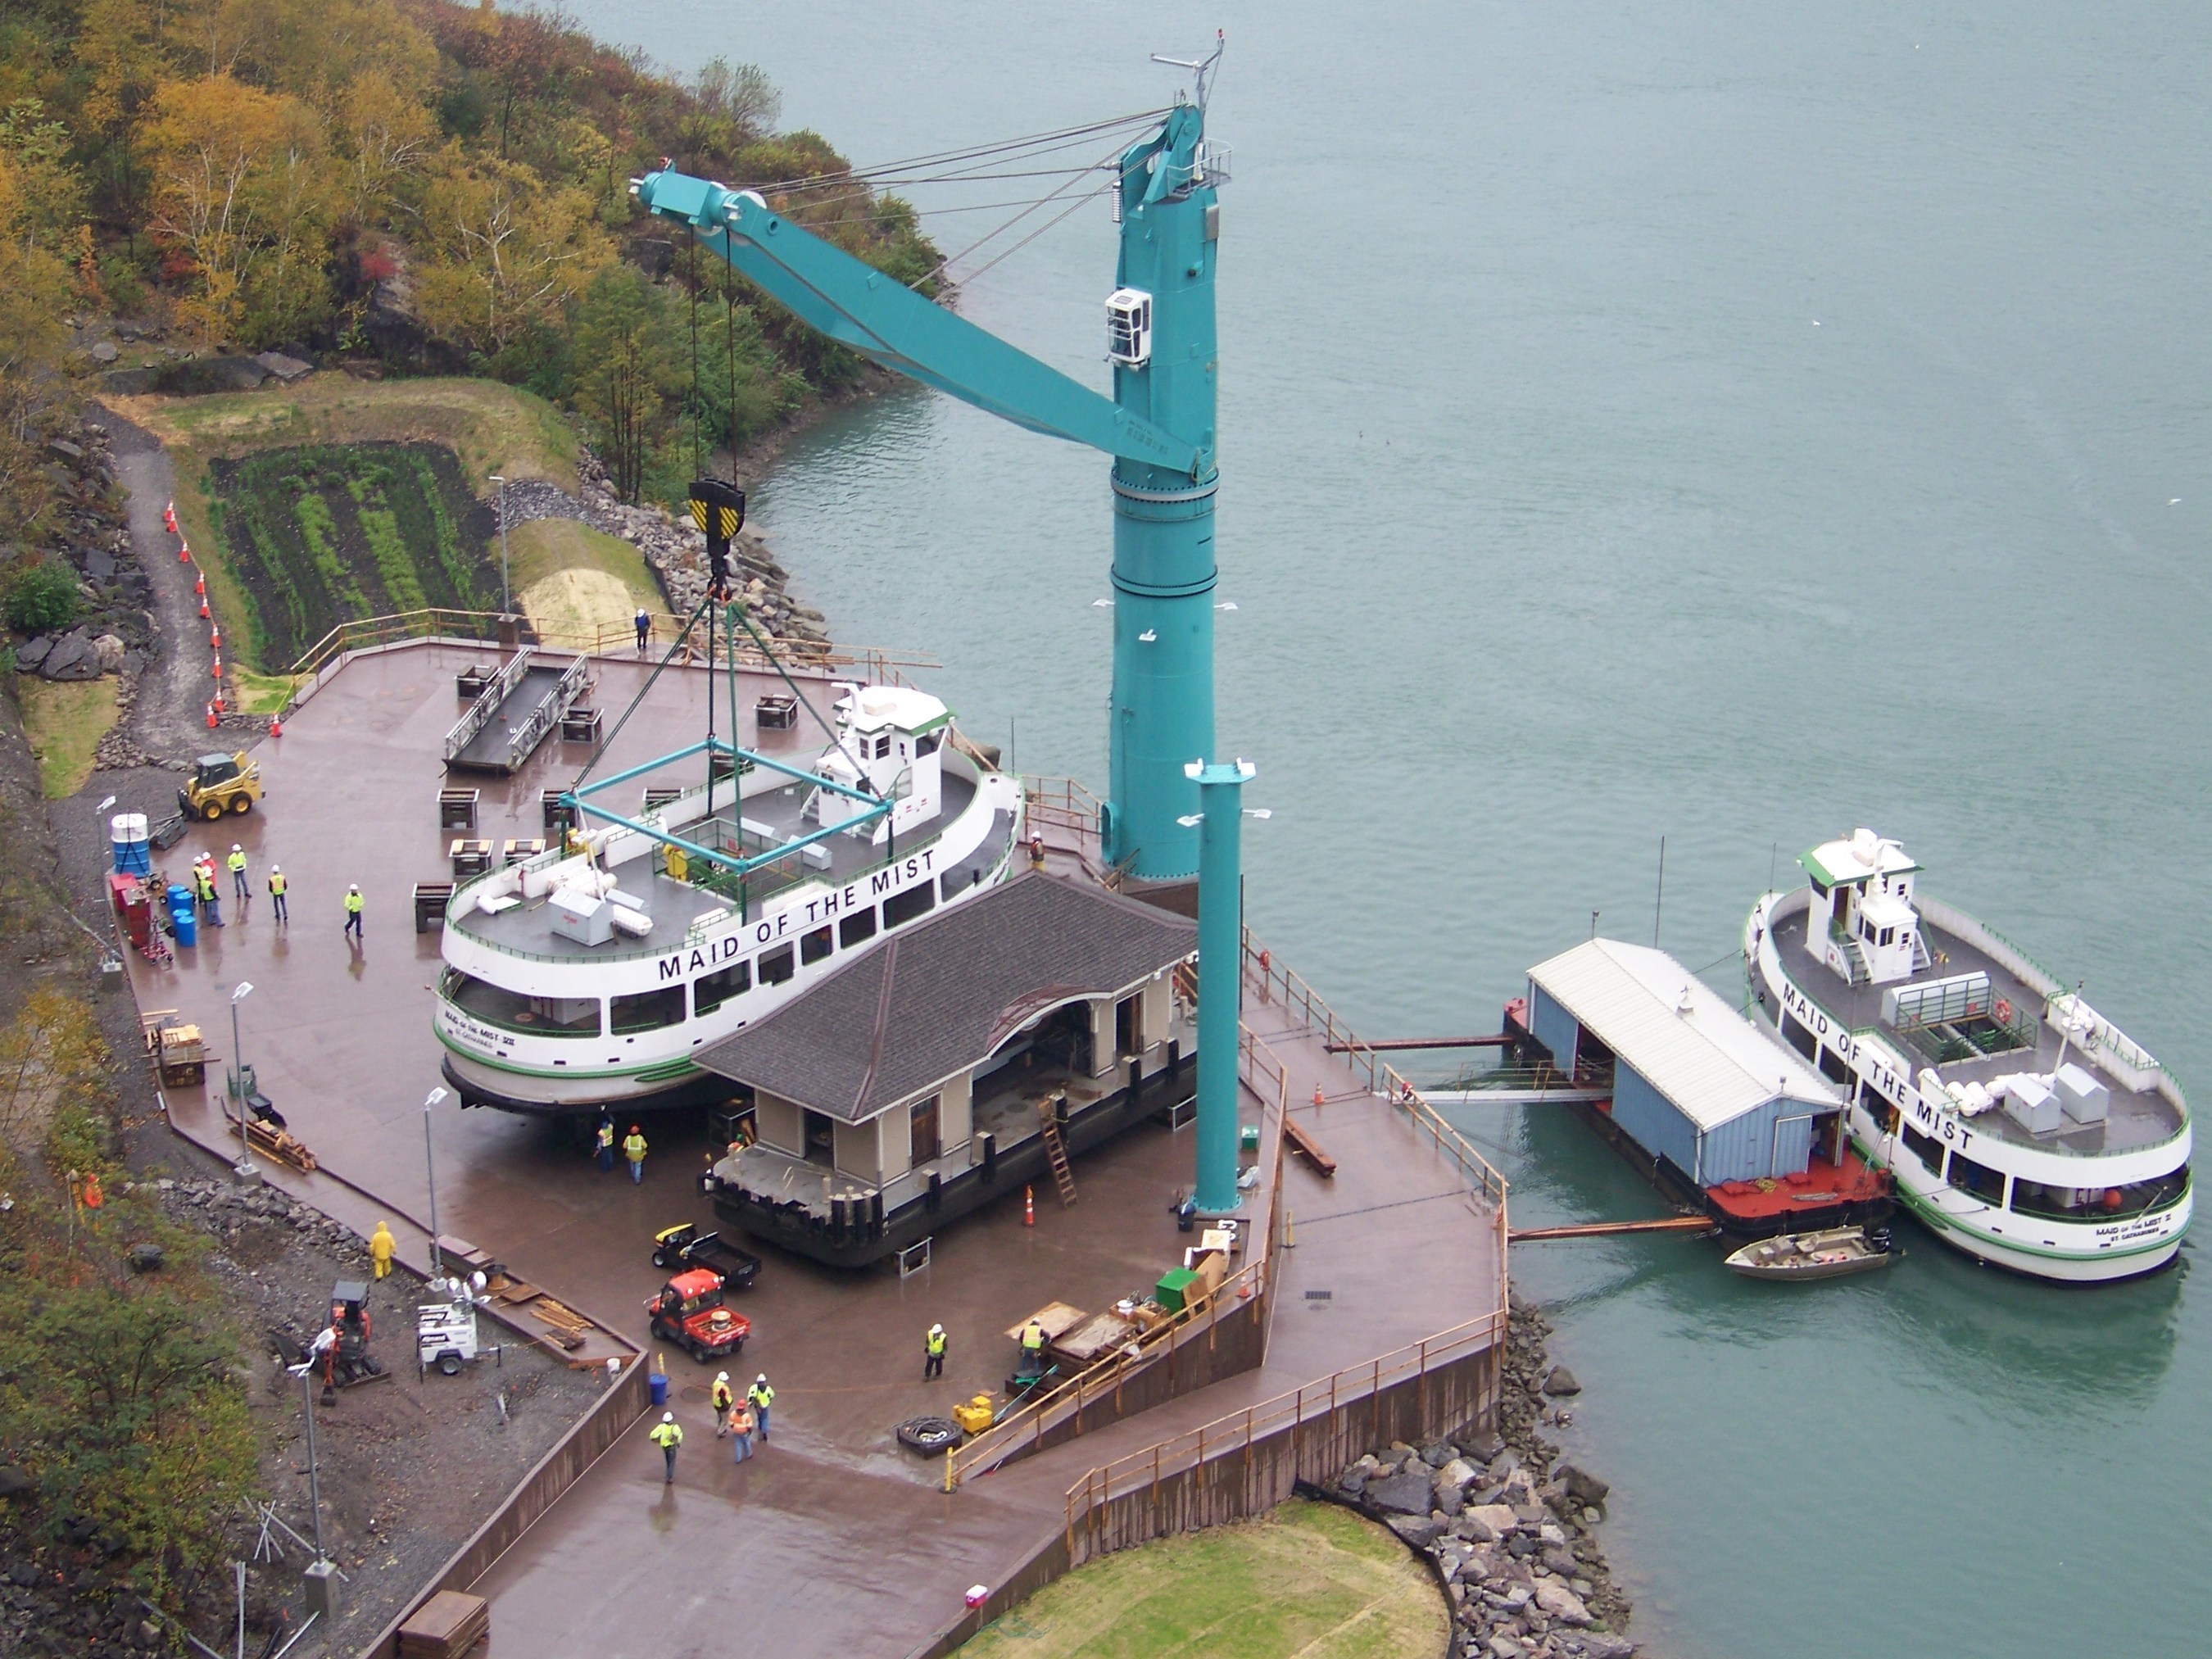 The Maid of the Mist dry dock facility in Niagara Falls, N.Y., is the off season home to Maid of the Mist VI and Maid of the Mist VII. The New York State Court of Appeals refused to hear challenges to lower court decisions dismissing a lawsuit filed by Hornblower, which challenged the Maid of the Mist's right to construct the facility.